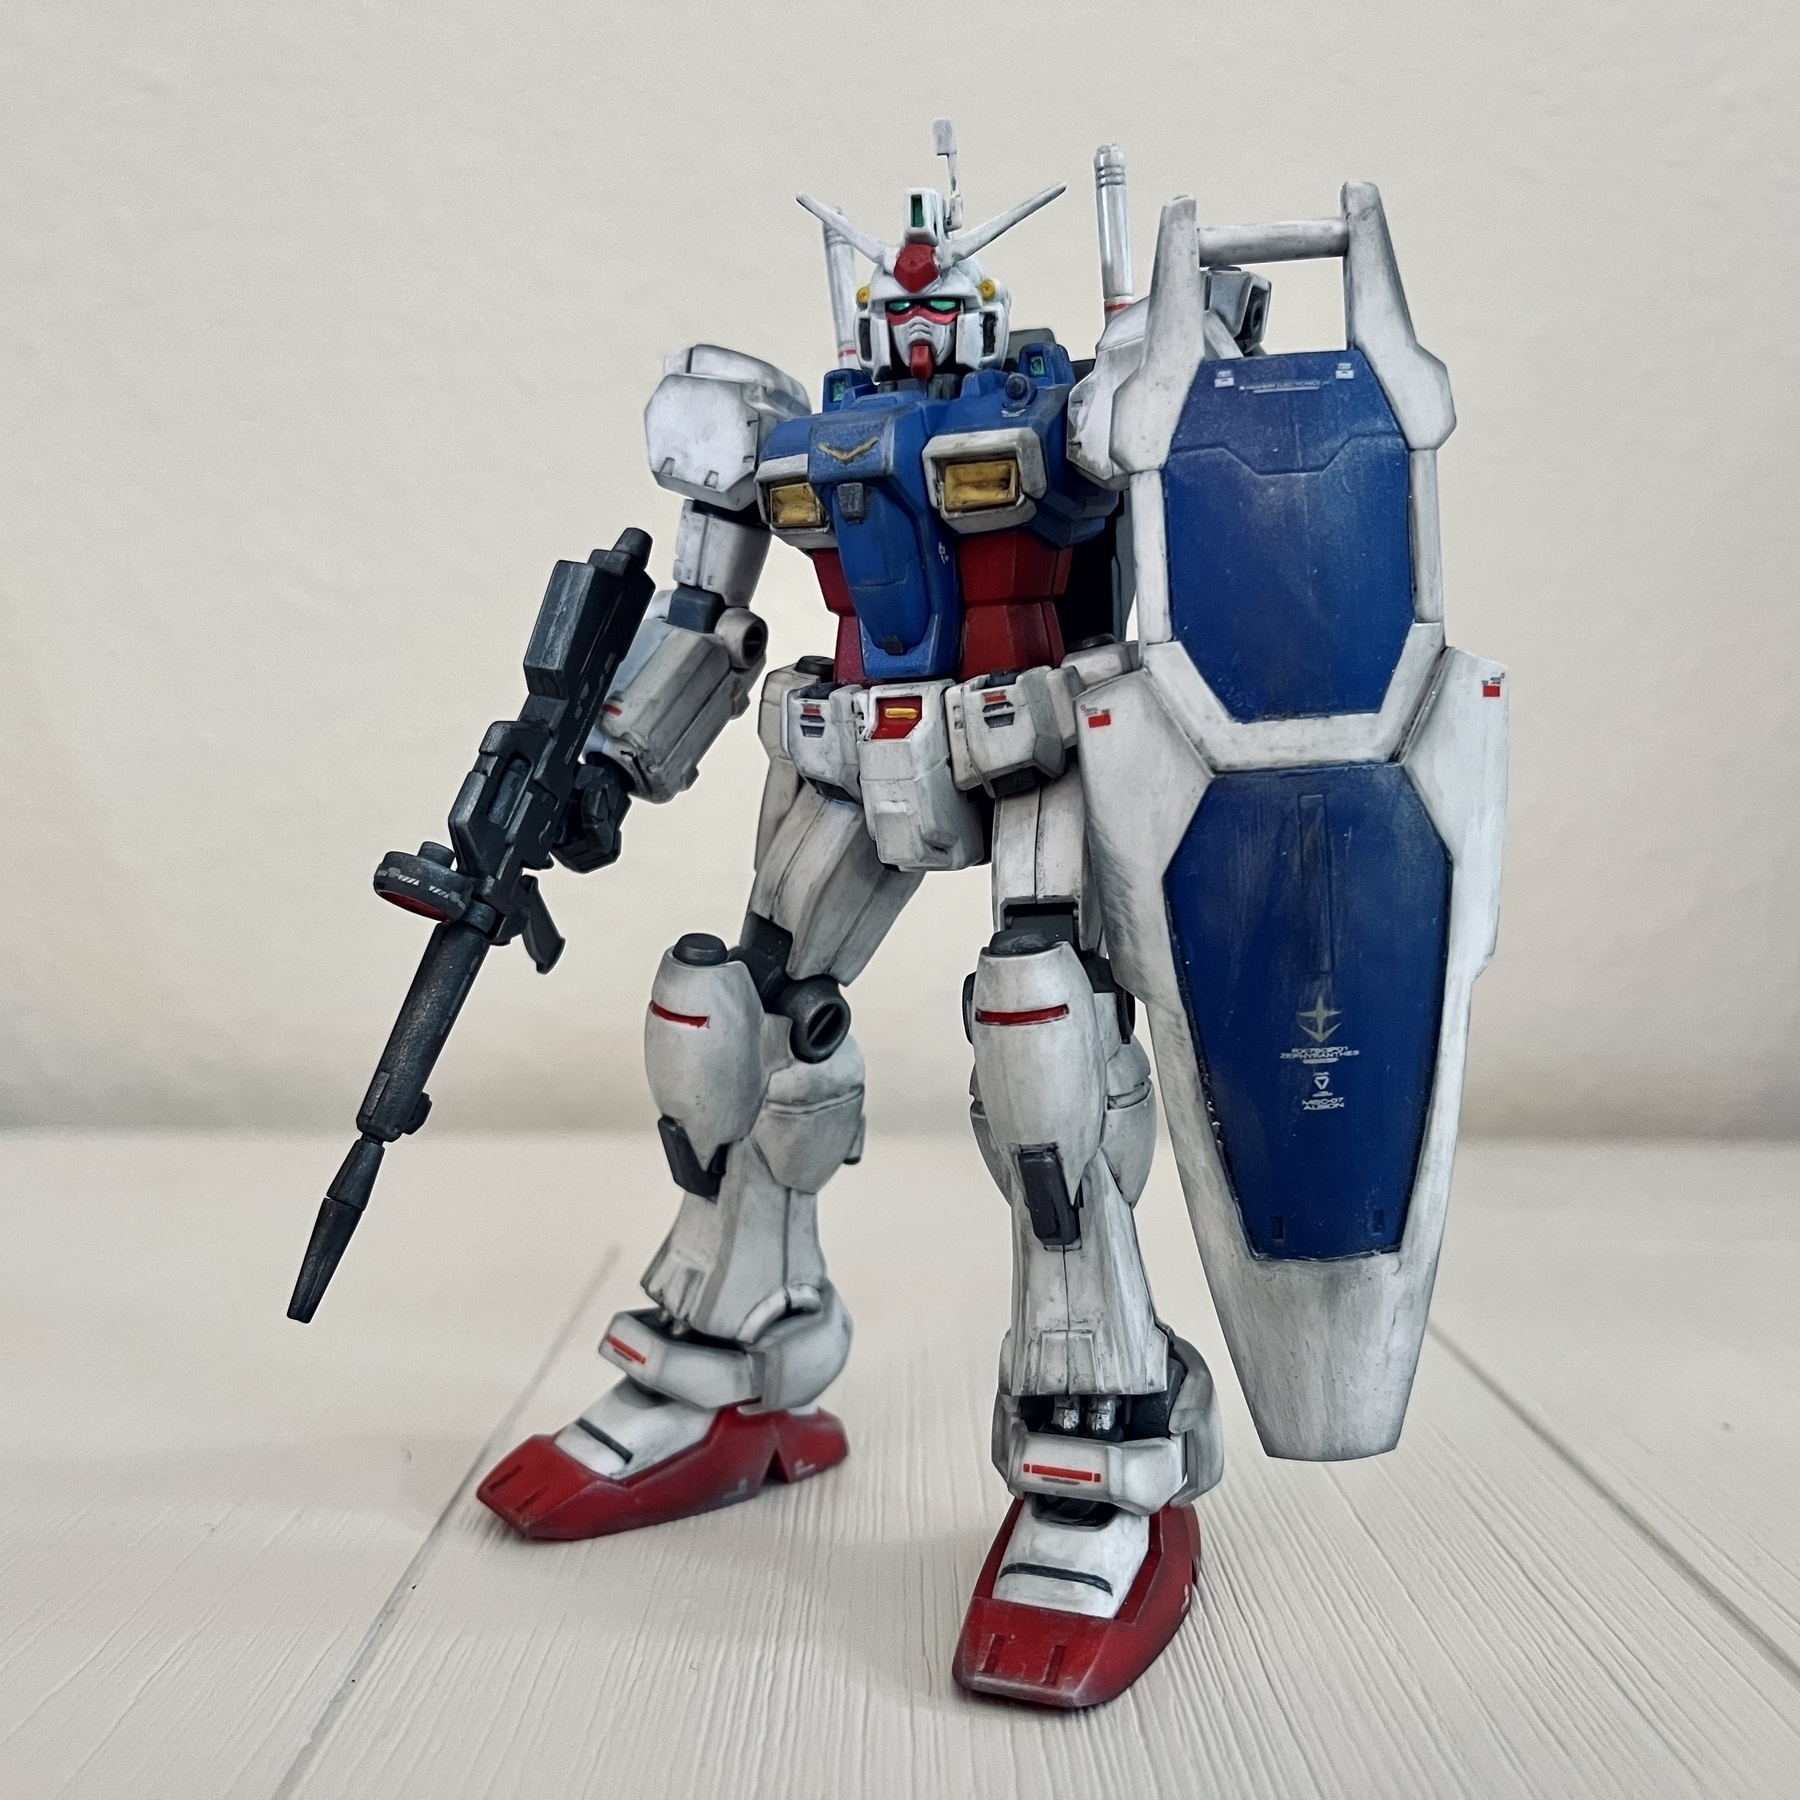 Completed model Gundam RX-78GP01